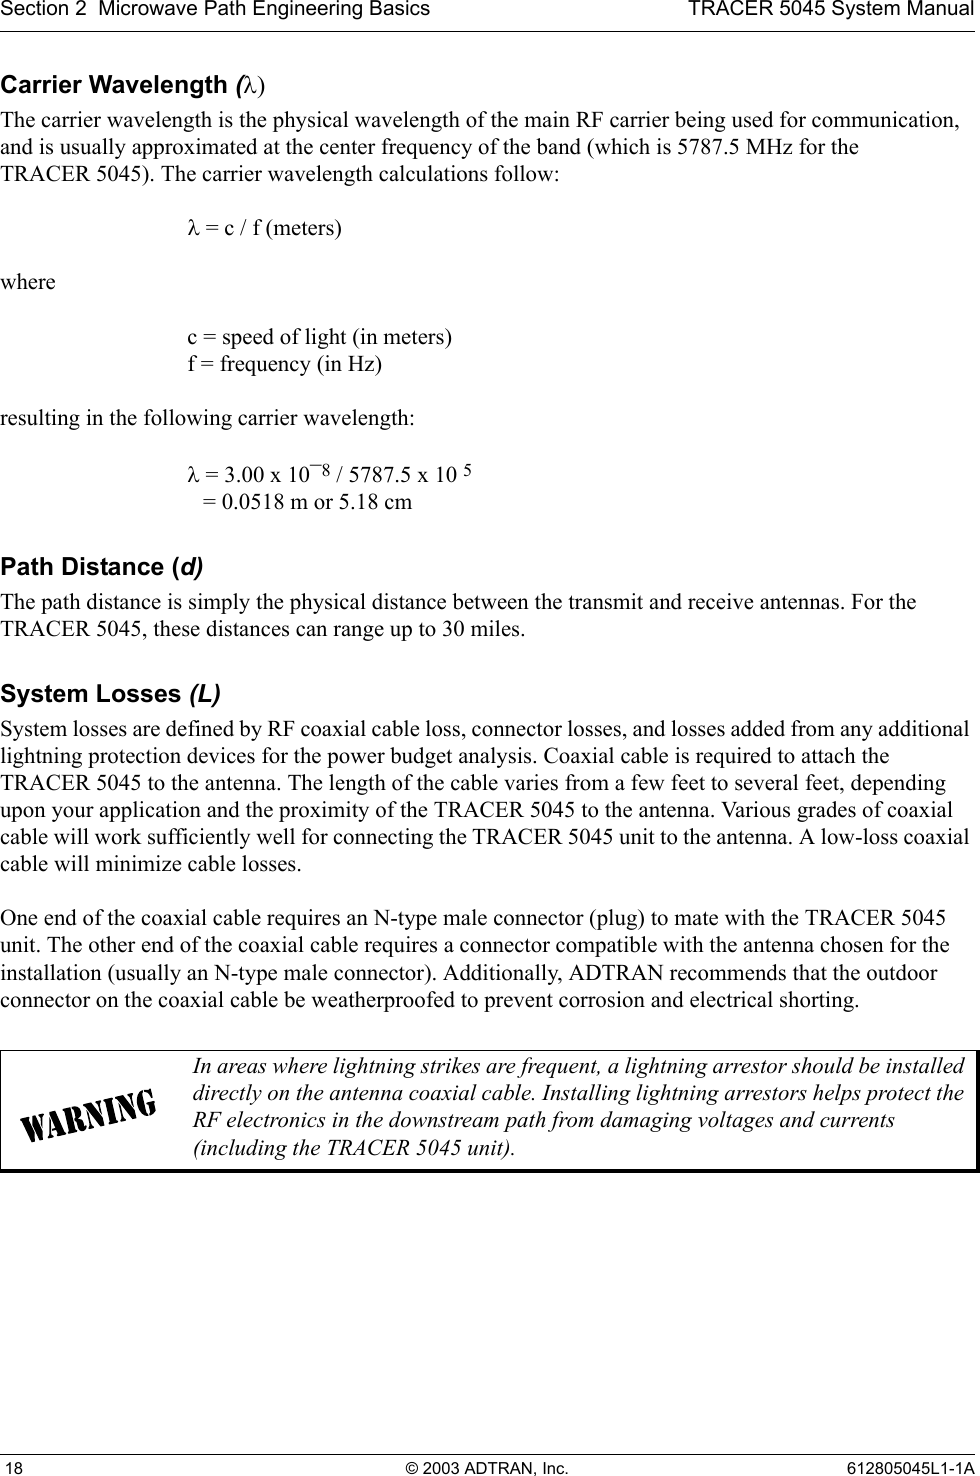 Section 2  Microwave Path Engineering Basics TRACER 5045 System Manual 18 © 2003 ADTRAN, Inc. 612805045L1-1ACarrier Wavelength (λ)The carrier wavelength is the physical wavelength of the main RF carrier being used for communication, and is usually approximated at the center frequency of the band (which is 5787.5 MHz for the TRACER 5045). The carrier wavelength calculations follow:λ = c / f (meters)where c = speed of light (in meters)f = frequency (in Hz)resulting in the following carrier wavelength:λ = 3.00 x 10¯8 / 5787.5 x 10 5 = 0.0518 m or 5.18 cmPath Distance (d)The path distance is simply the physical distance between the transmit and receive antennas. For the TRACER 5045, these distances can range up to 30 miles. System Losses (L)System losses are defined by RF coaxial cable loss, connector losses, and losses added from any additional lightning protection devices for the power budget analysis. Coaxial cable is required to attach the TRACER 5045 to the antenna. The length of the cable varies from a few feet to several feet, depending upon your application and the proximity of the TRACER 5045 to the antenna. Various grades of coaxial cable will work sufficiently well for connecting the TRACER 5045 unit to the antenna. A low-loss coaxial cable will minimize cable losses.One end of the coaxial cable requires an N-type male connector (plug) to mate with the TRACER 5045 unit. The other end of the coaxial cable requires a connector compatible with the antenna chosen for the installation (usually an N-type male connector). Additionally, ADTRAN recommends that the outdoor connector on the coaxial cable be weatherproofed to prevent corrosion and electrical shorting.In areas where lightning strikes are frequent, a lightning arrestor should be installed directly on the antenna coaxial cable. Installing lightning arrestors helps protect the RF electronics in the downstream path from damaging voltages and currents (including the TRACER 5045 unit).